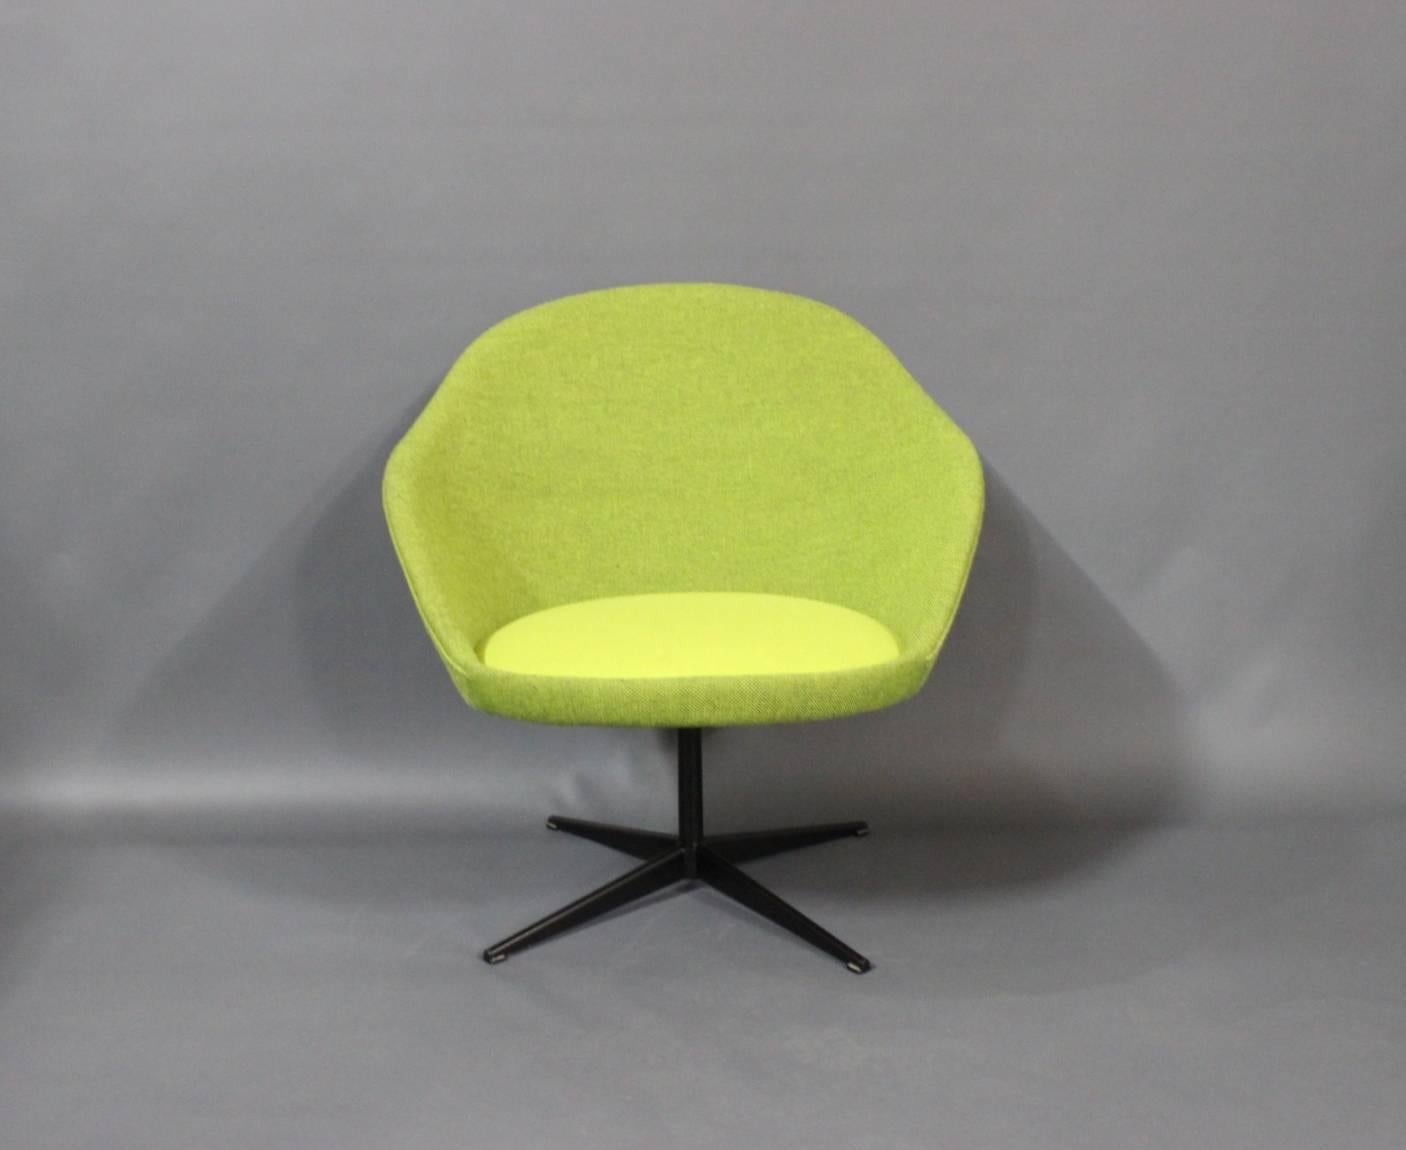 Scandinavian Modern Lounge Chair in Green Hallingdal Wool, Danish Design from the 1960s For Sale